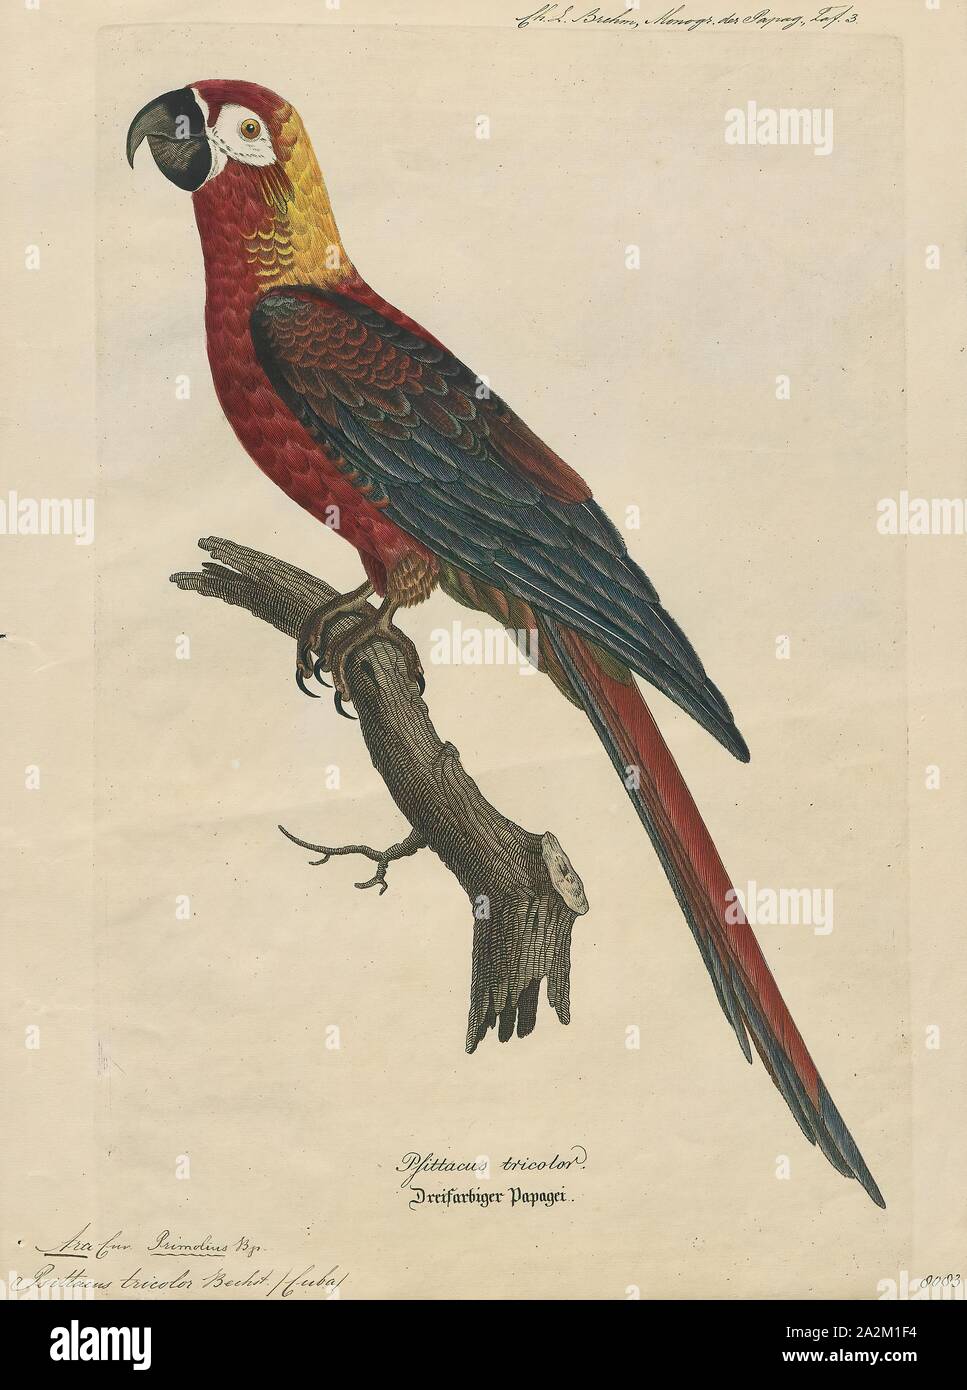 Ara Print, Cuban macaw or Cuban red macaw (Ara tricolor) was a species of macaw native to the main island of Cuba and the nearby Isla de la Juventud that